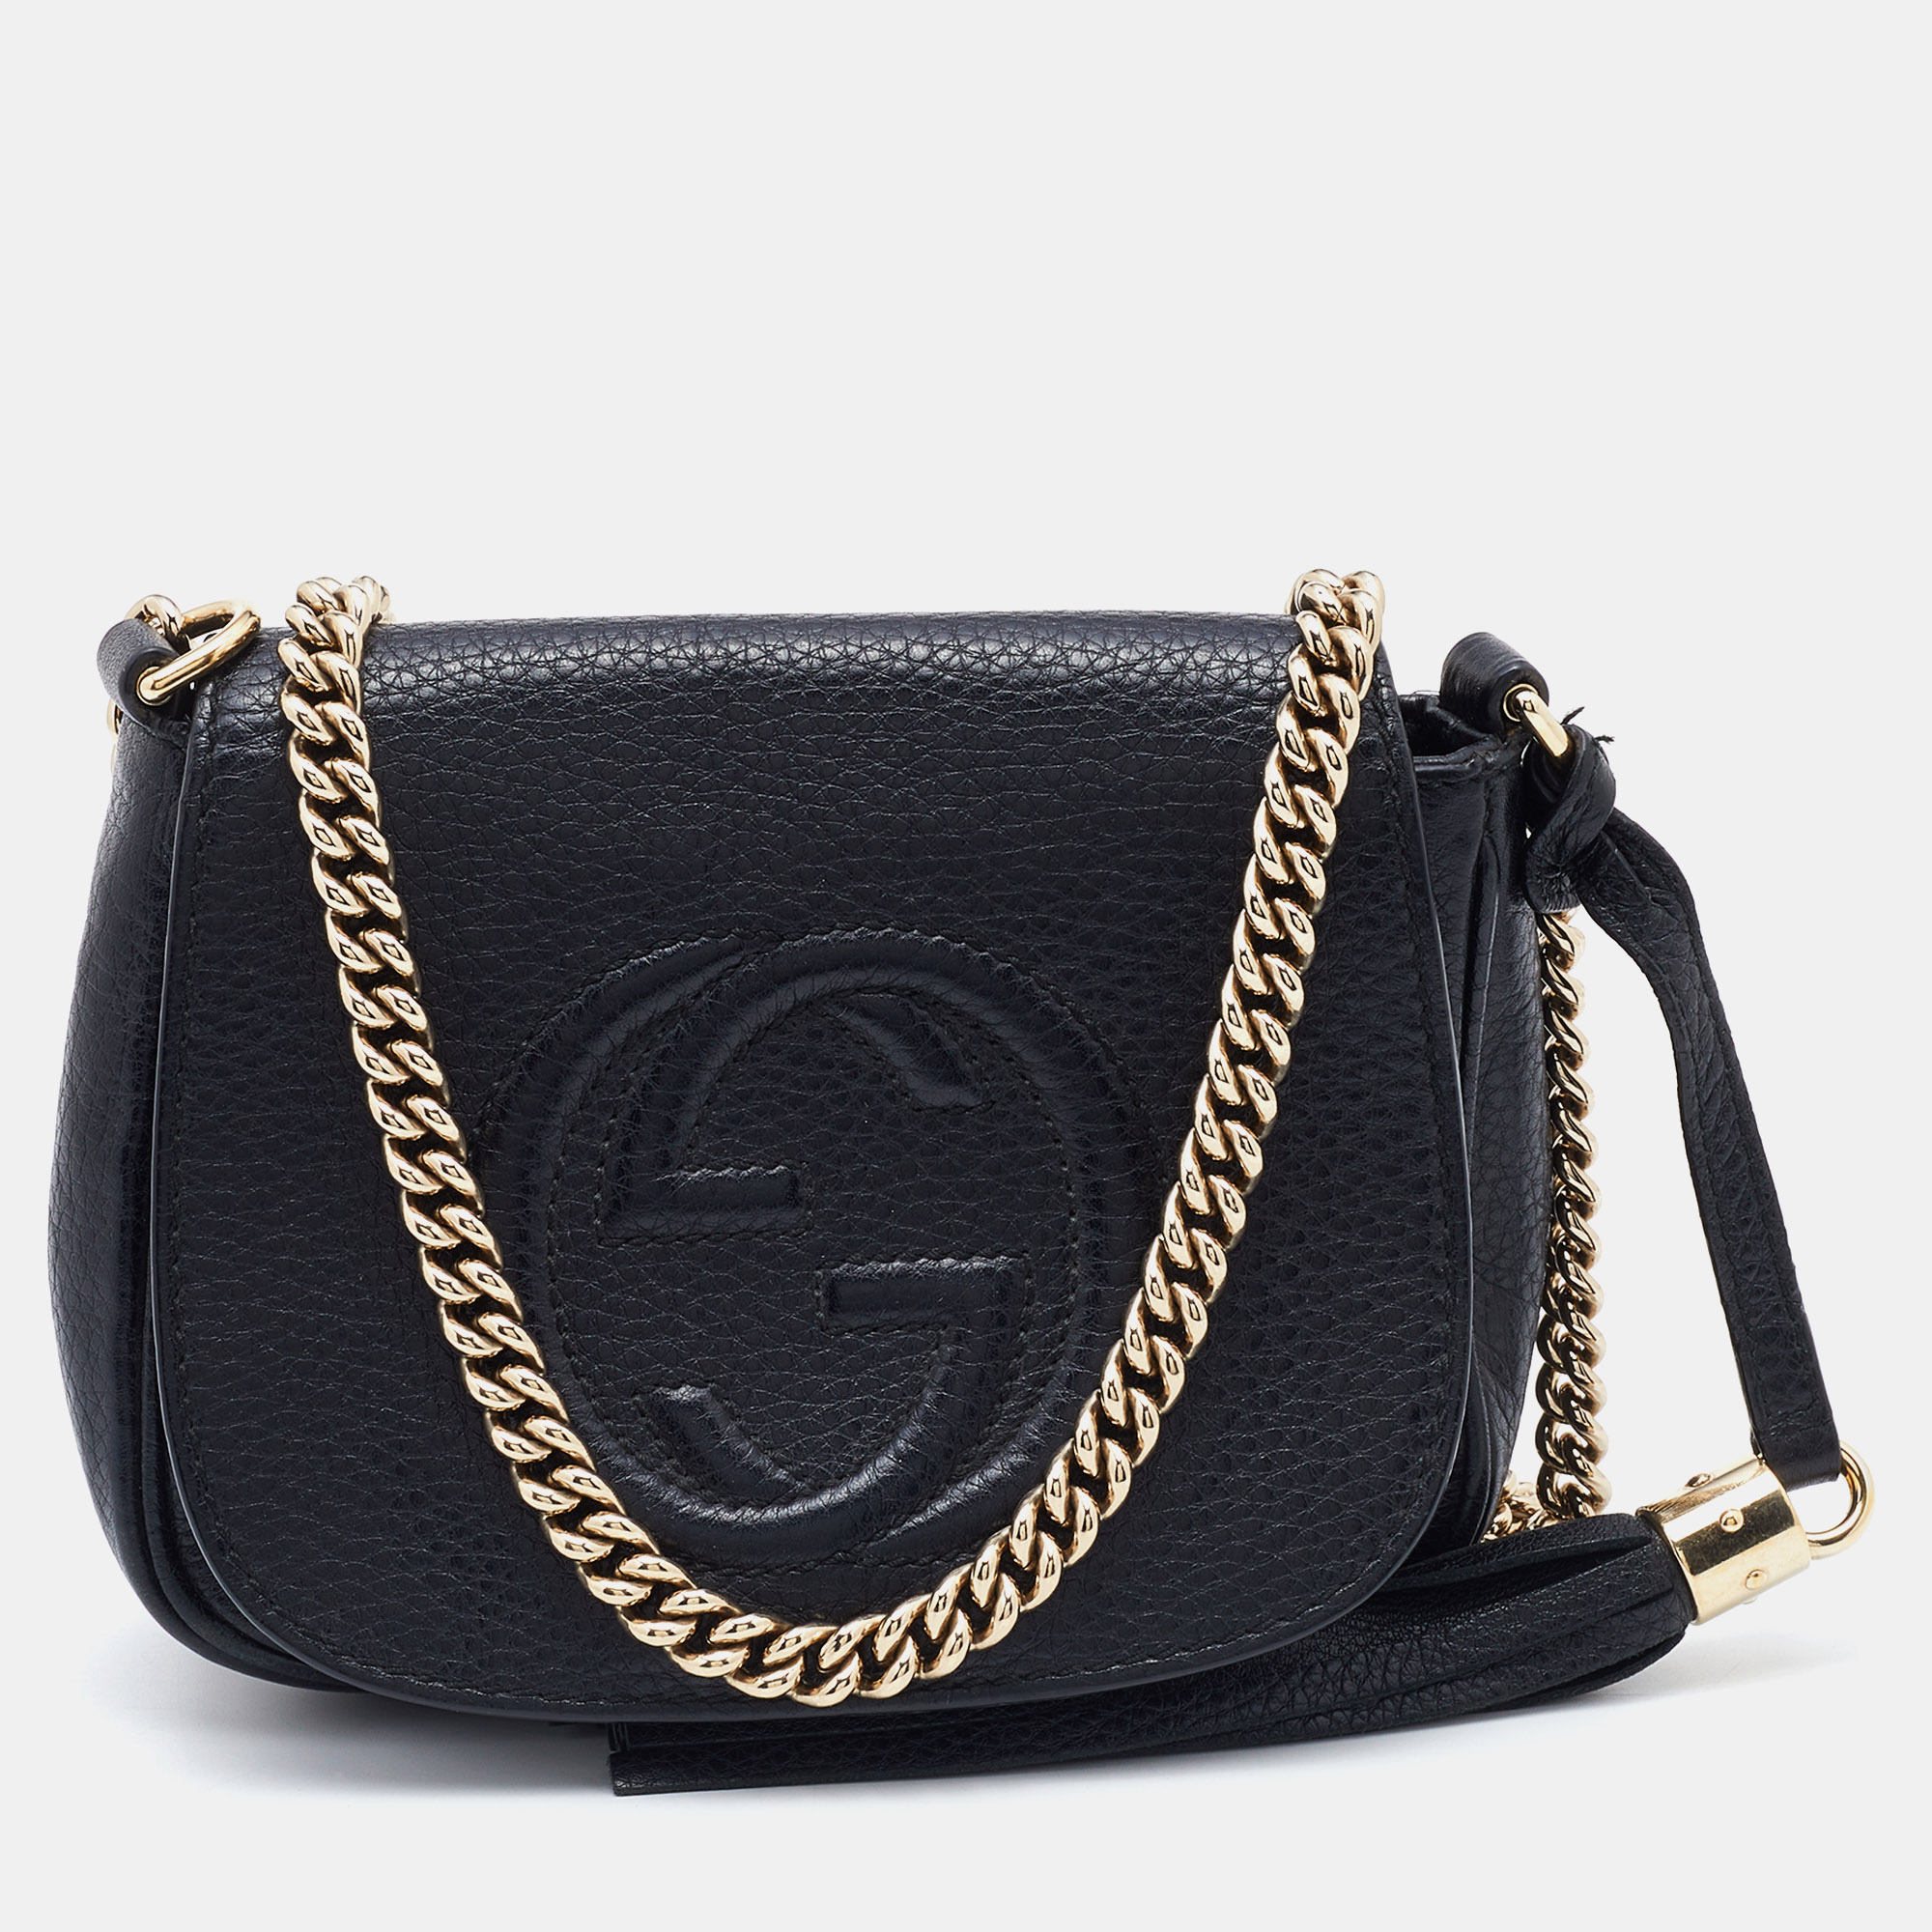 Pre-owned Gucci Black Leather Soho Flap Chain Crossbody Bag